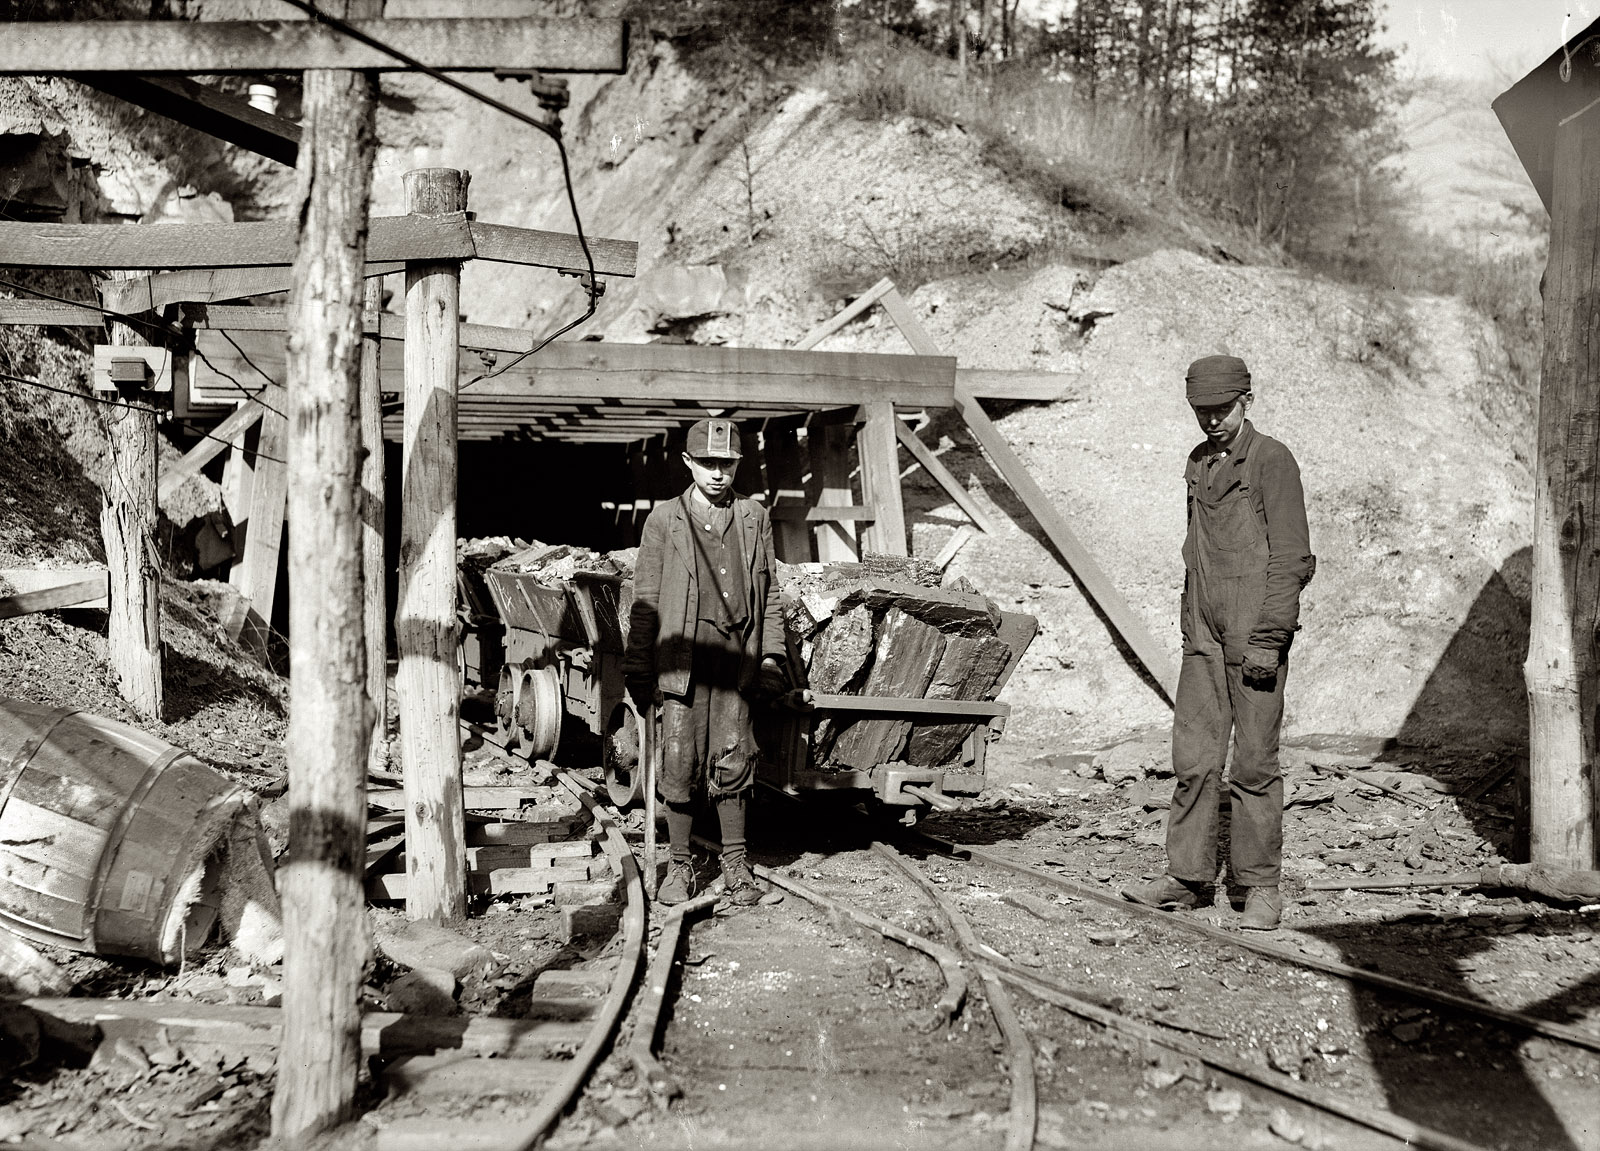 December 1910. Coal Creek, Tennessee. "Hard work and dangerous for such a young boy. James O'Dell, a greaser and coupler on the tipple of the Cross Mountain Mine, Knoxville Iron Co., in the vicinity of Coal Creek. James has been there four months. Helps push these heavily loaded cars. Appears to be about 12 or 13 years old." Photograph and caption by Lewis Wickes Hine. View full size.